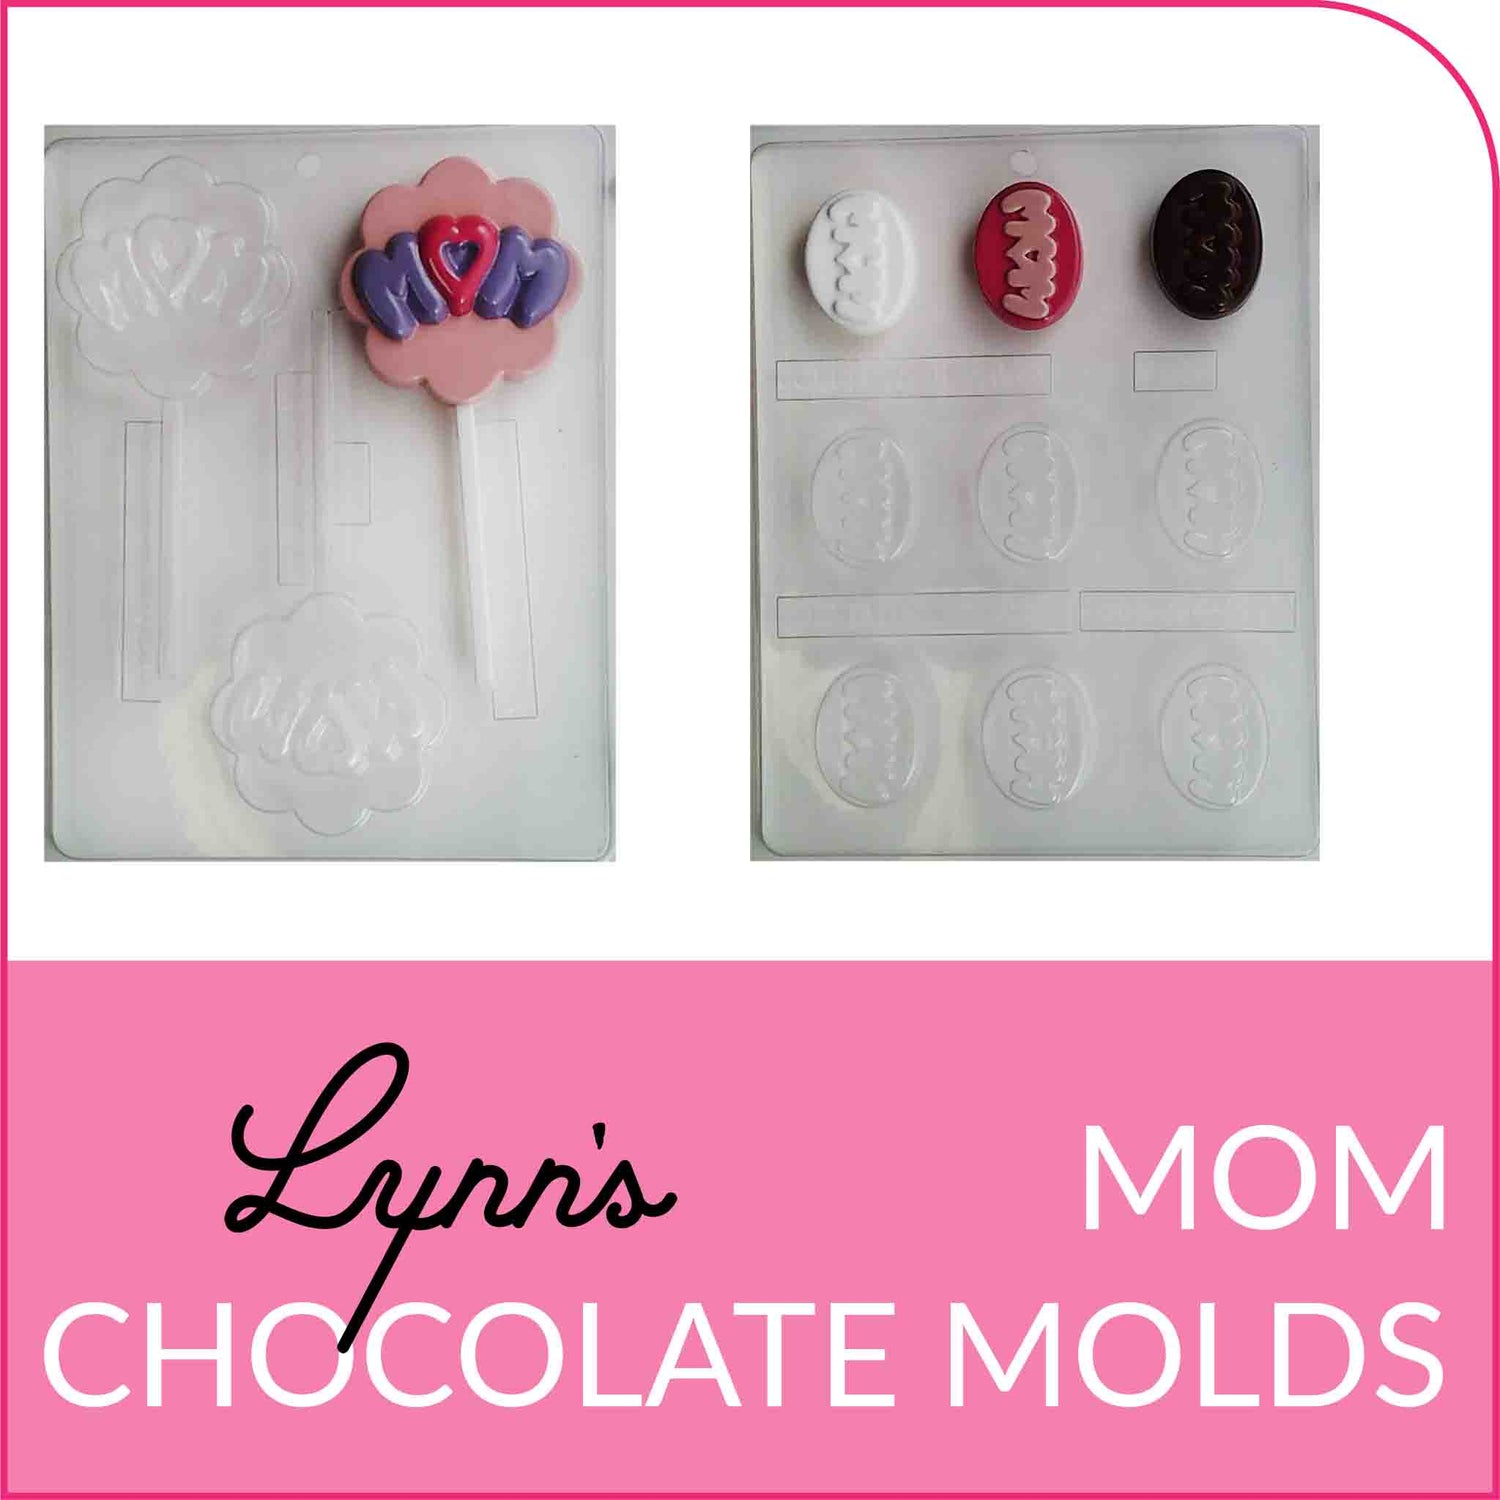 Link to Mother's Day Chocolate Molds from Lynn's